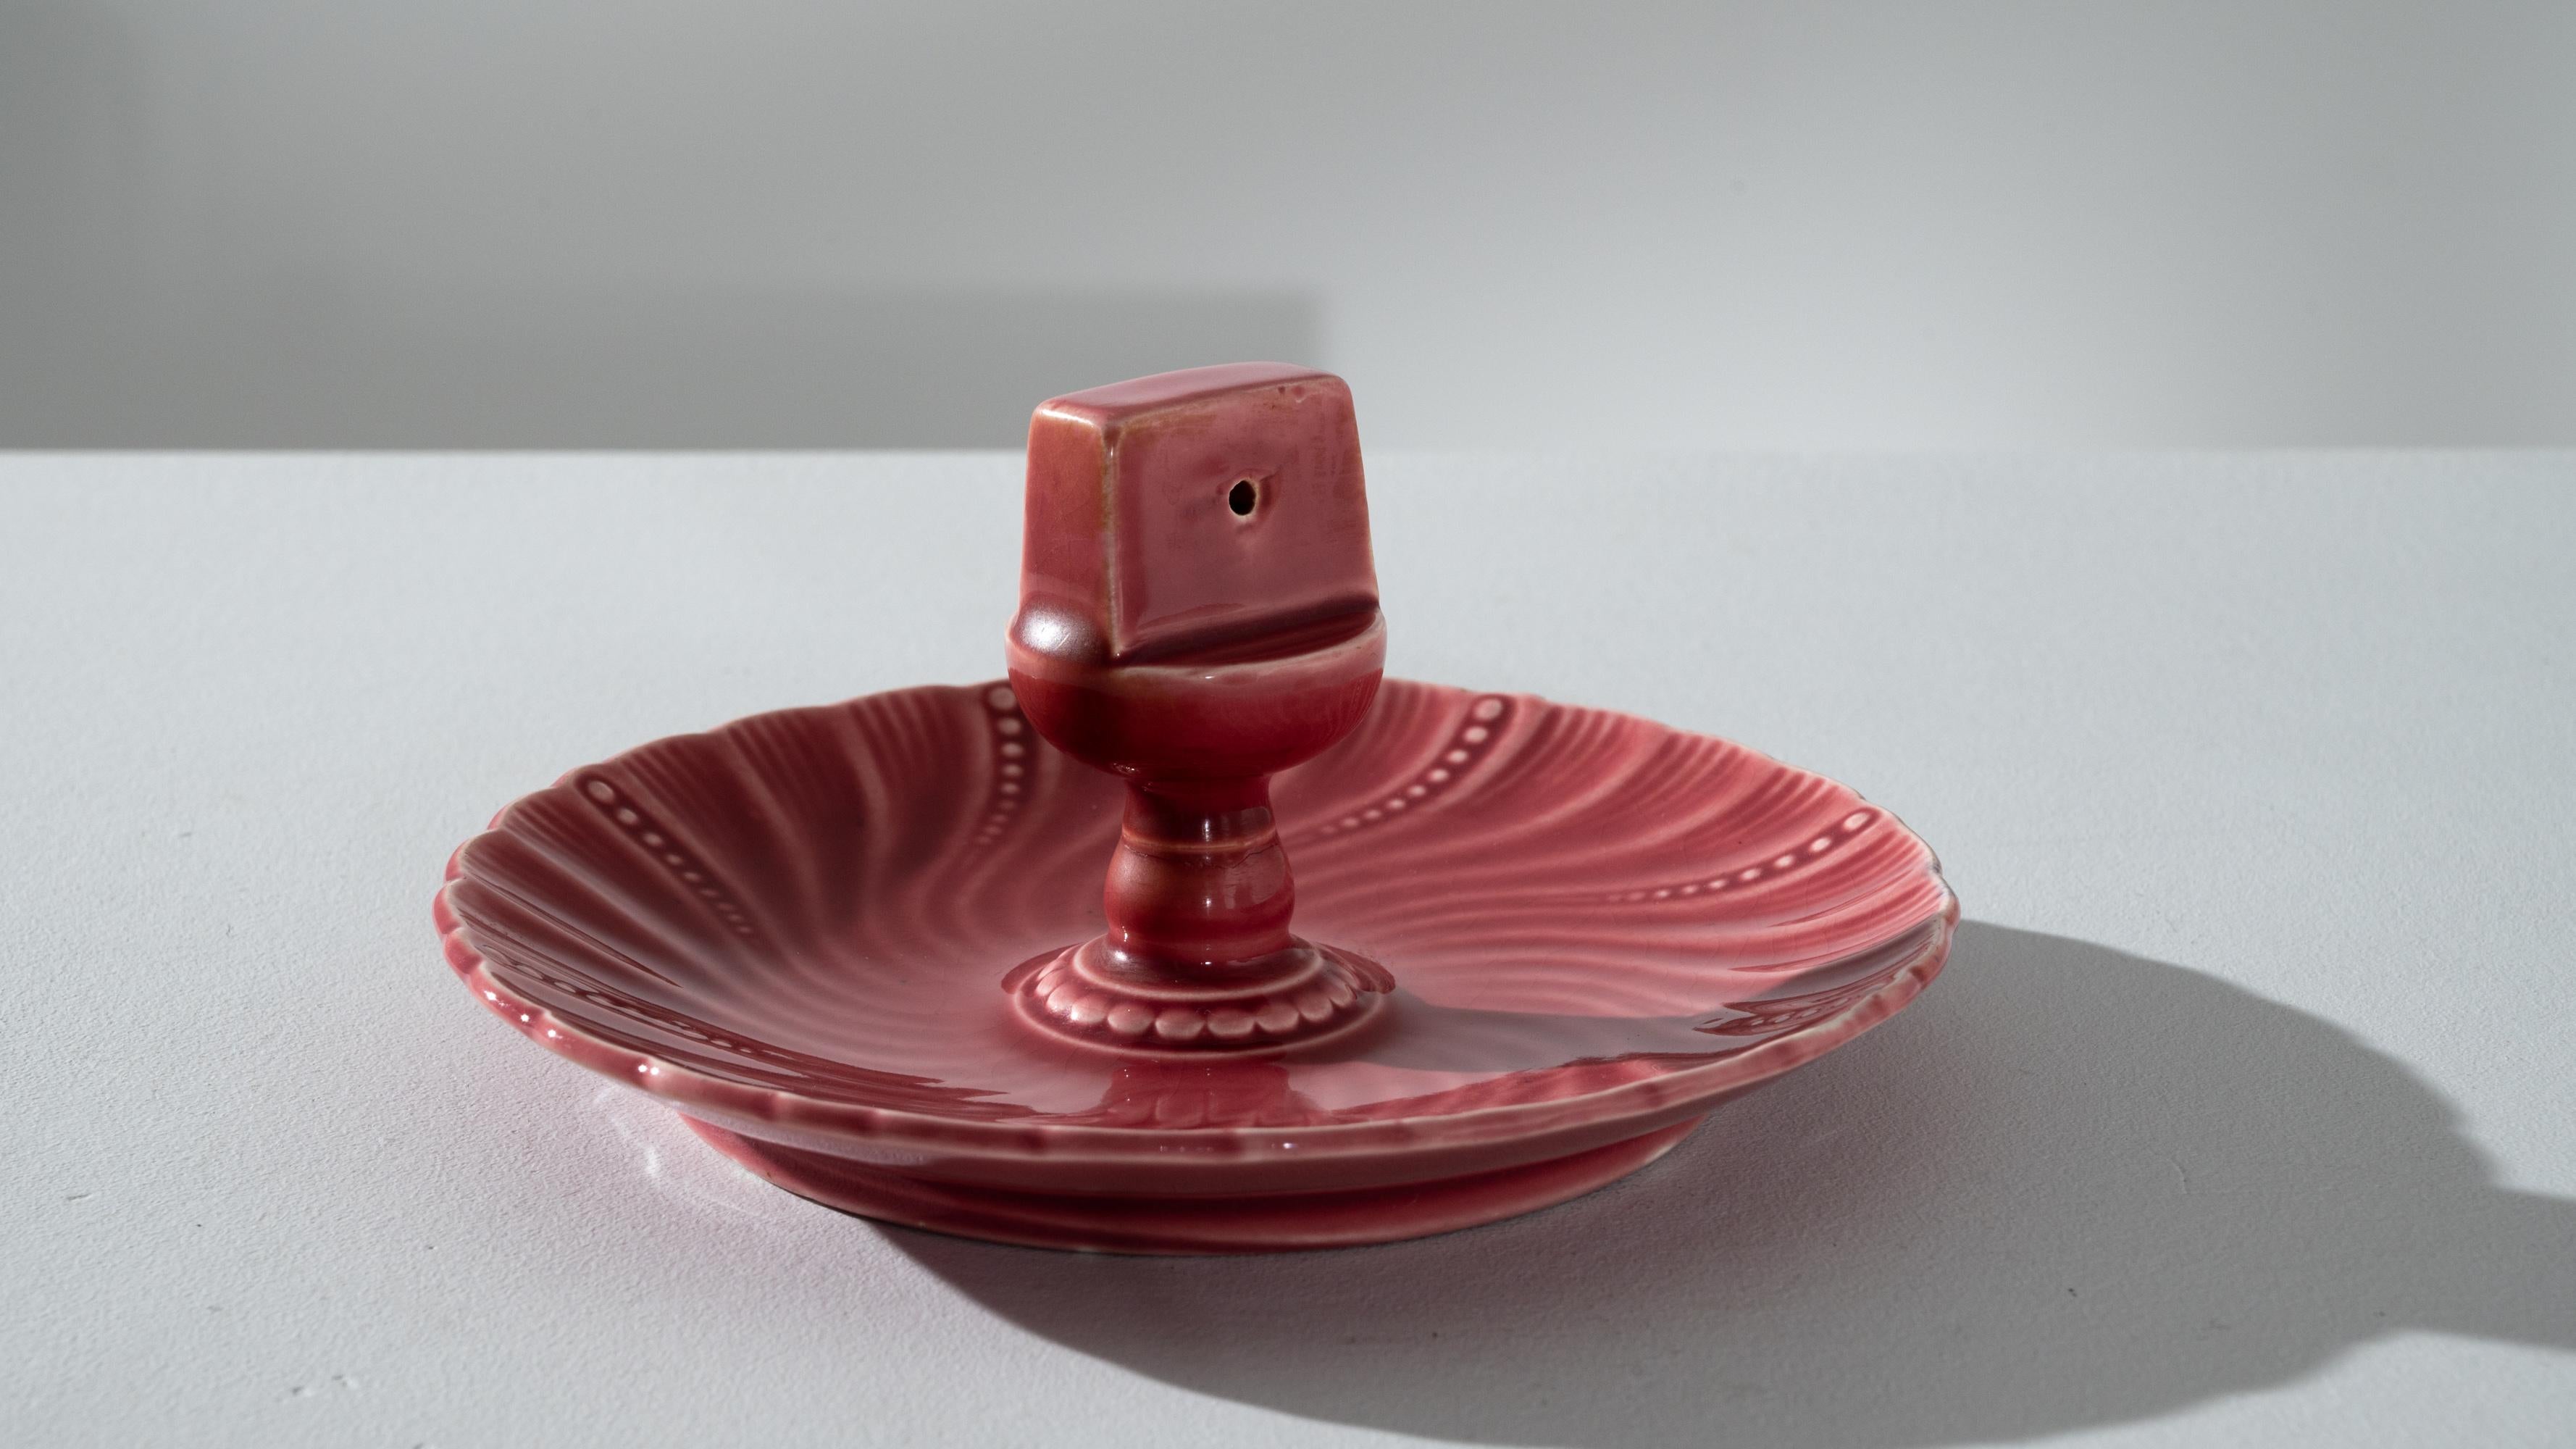 This vintage ceramic decoration offers an attractive accent. Made in France in the 20th century, the flowing curves of the scalloped edges create an attractive form, reminiscent of a decorative fountain. The carmine glaze of the ceramic has aged